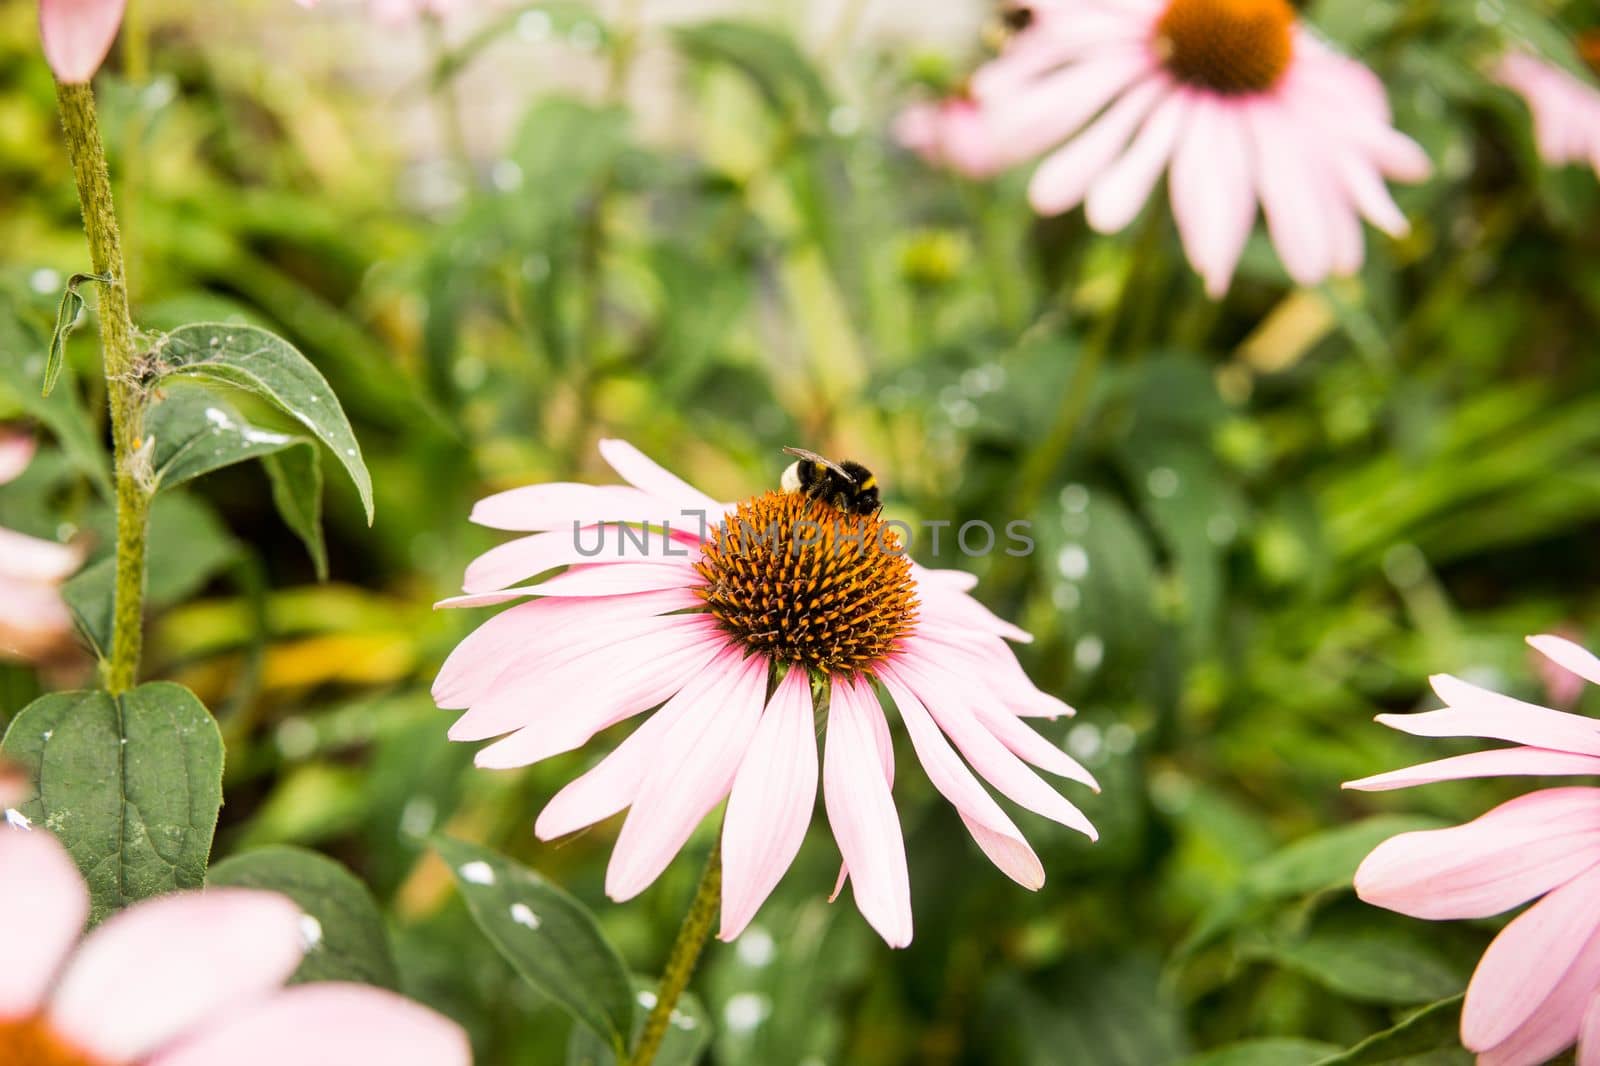 Beautiful daisies growing in the garden. Gardening concept, close-up. The flower is pollinated by a bumblebee. by Annu1tochka